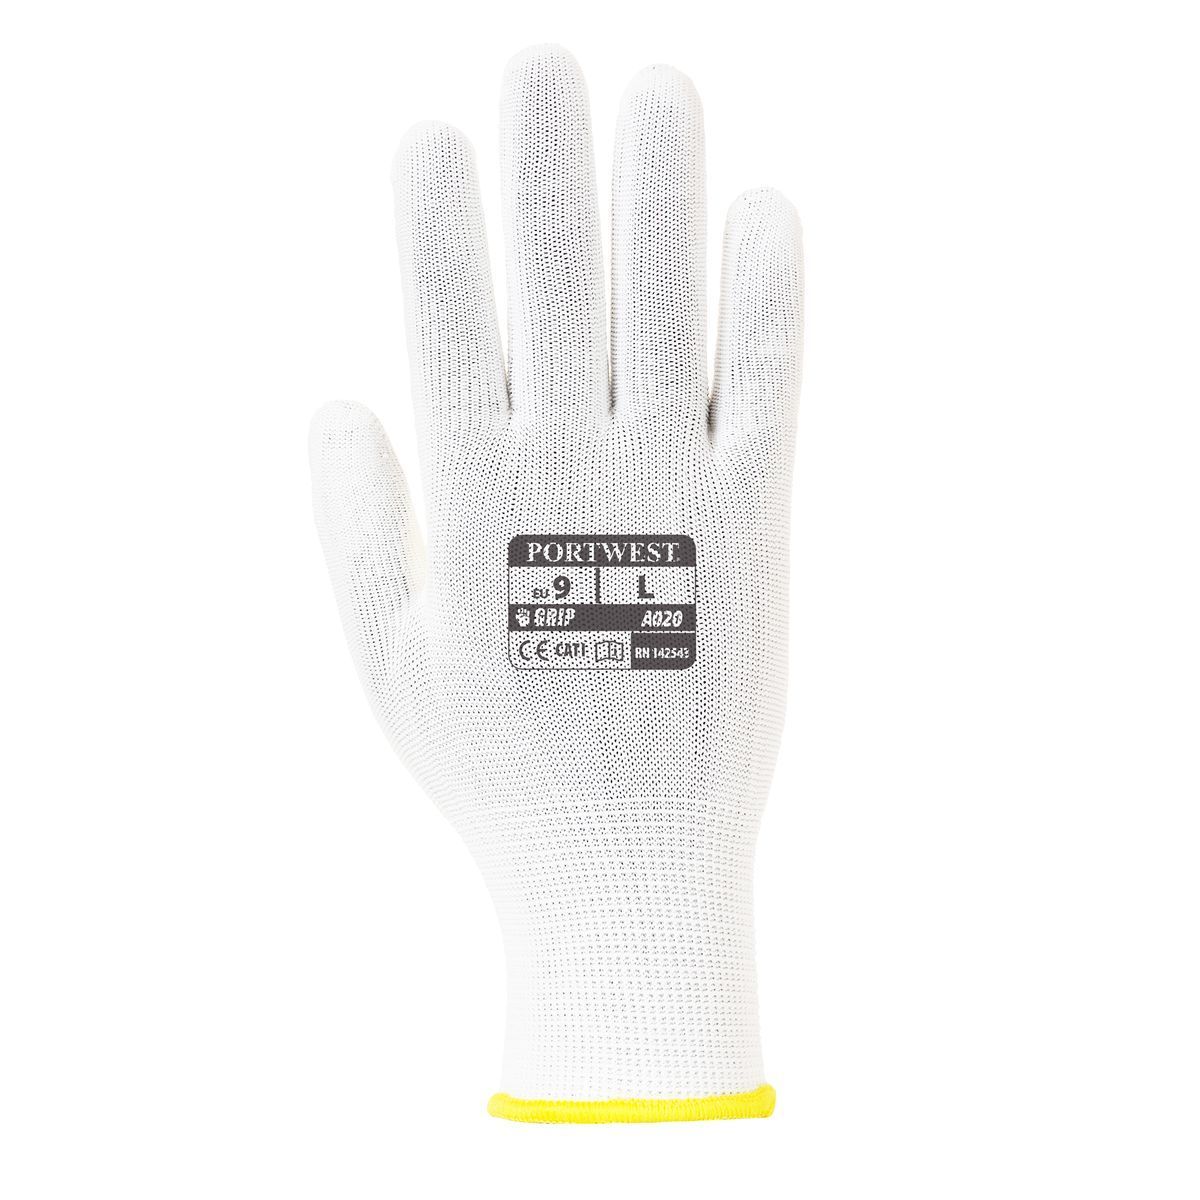 Style A020 Assembly Glove 960 Pairs-1